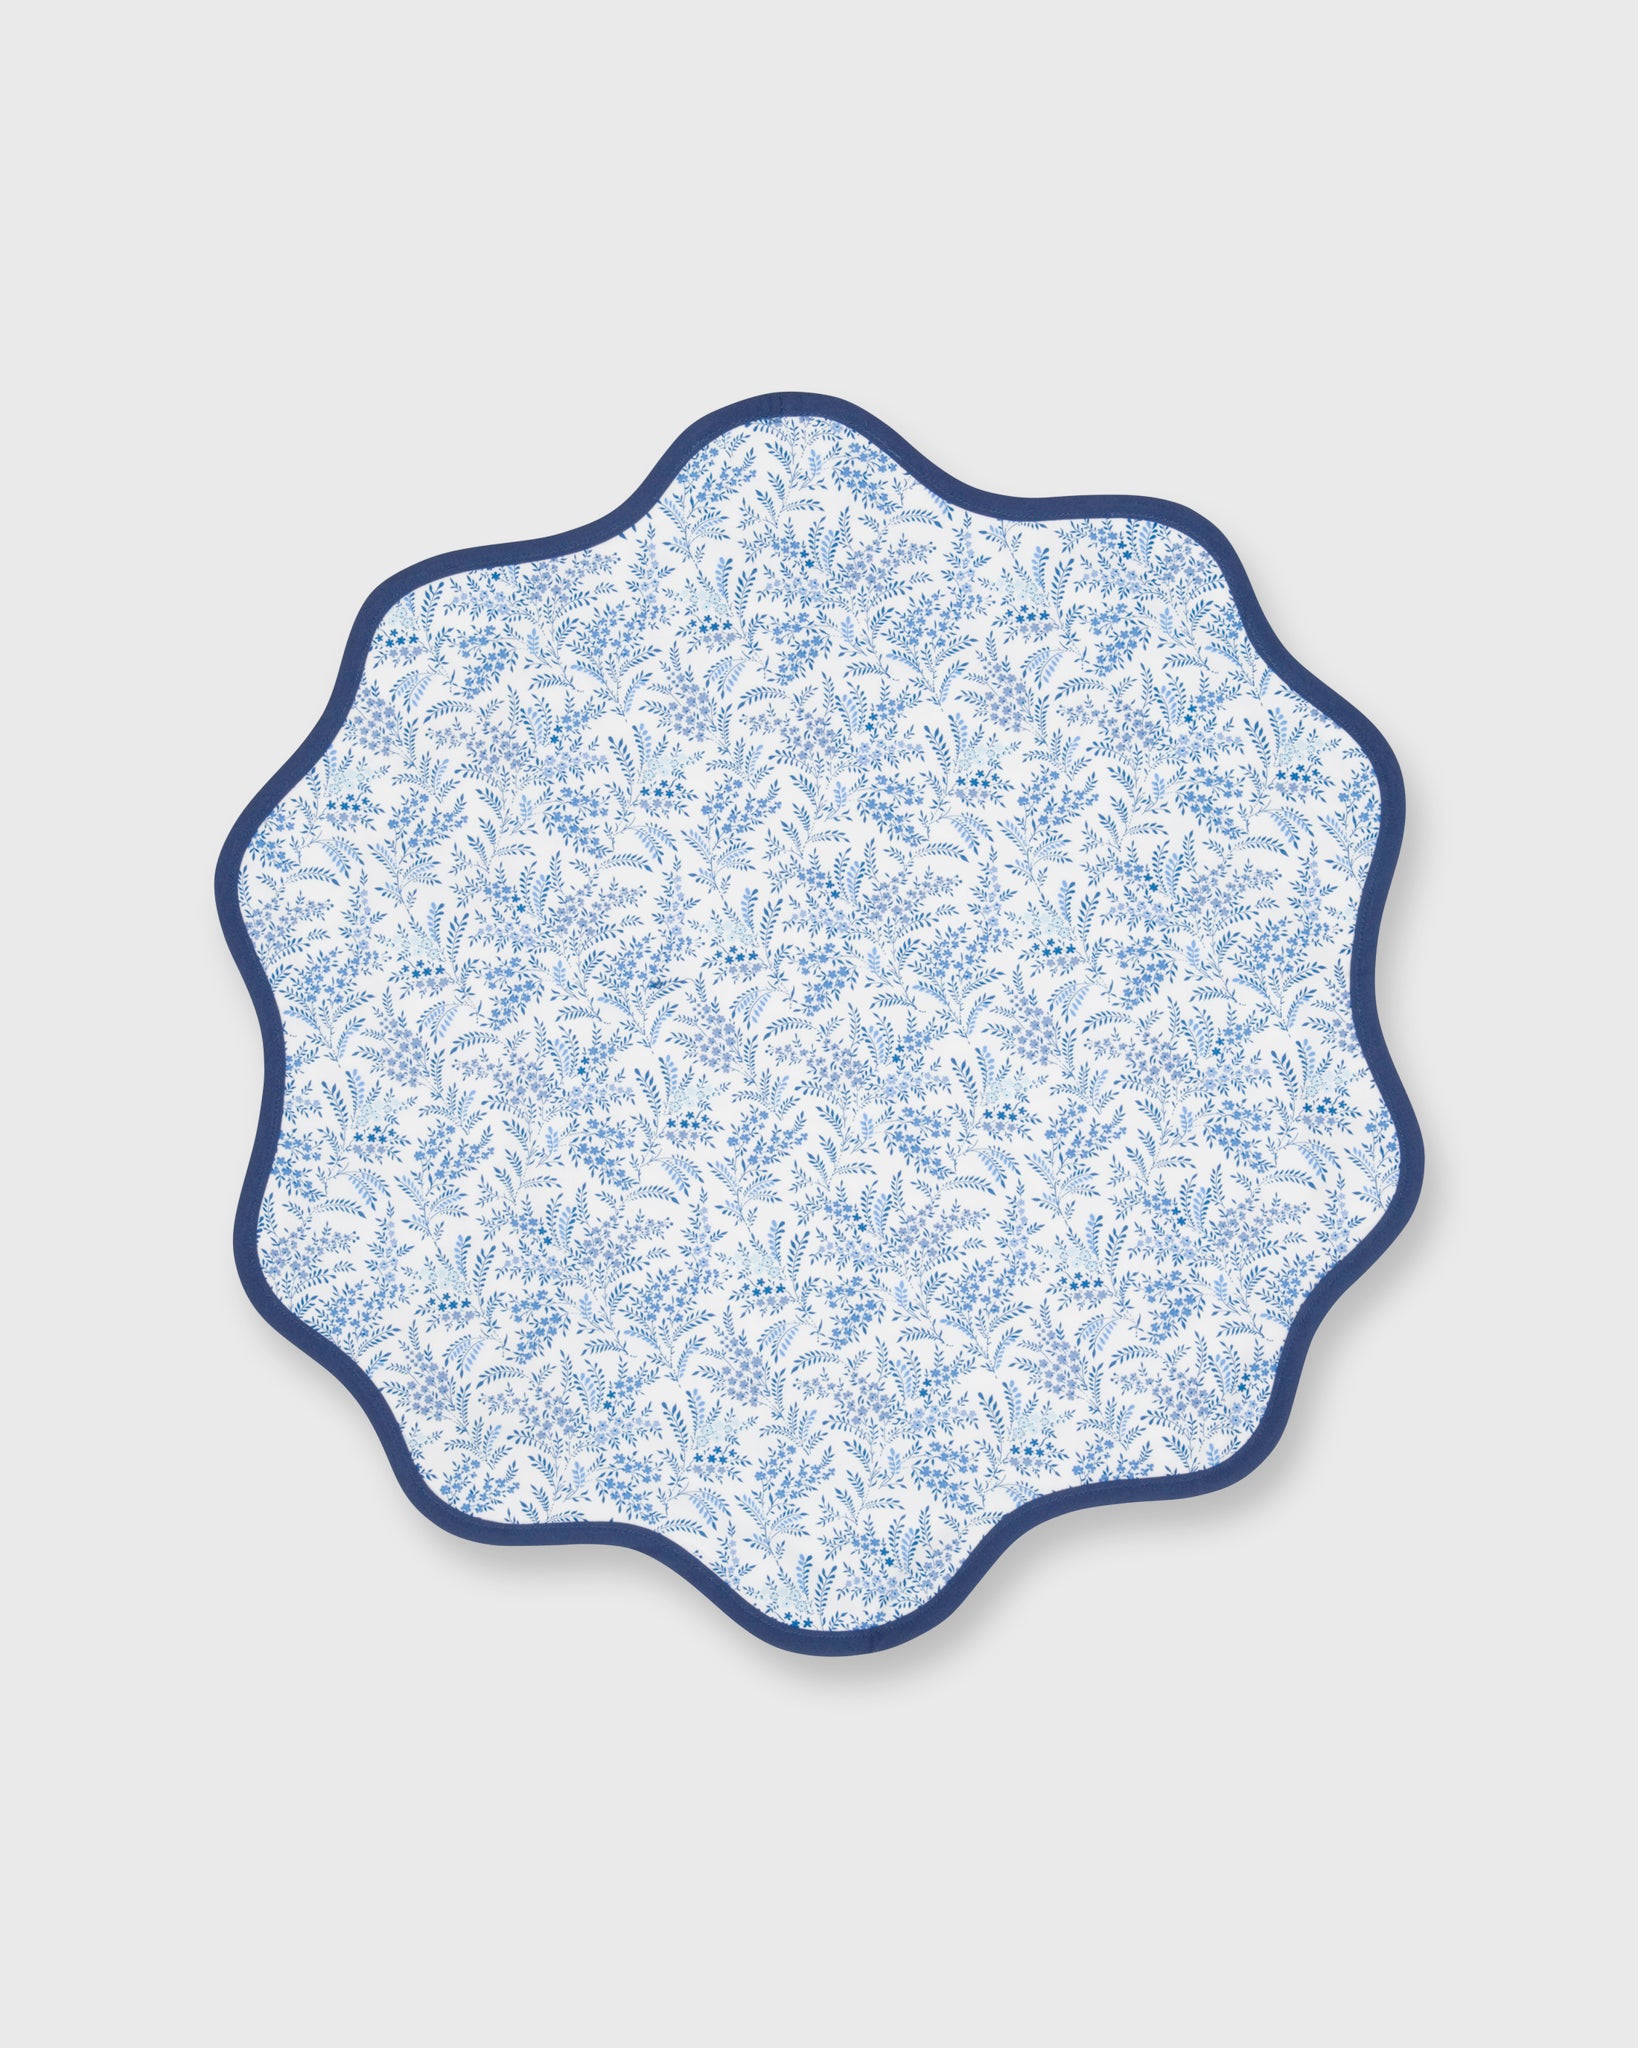 Scallop Edge Placemat in Blue/White Hope Springs Liberty Fabric